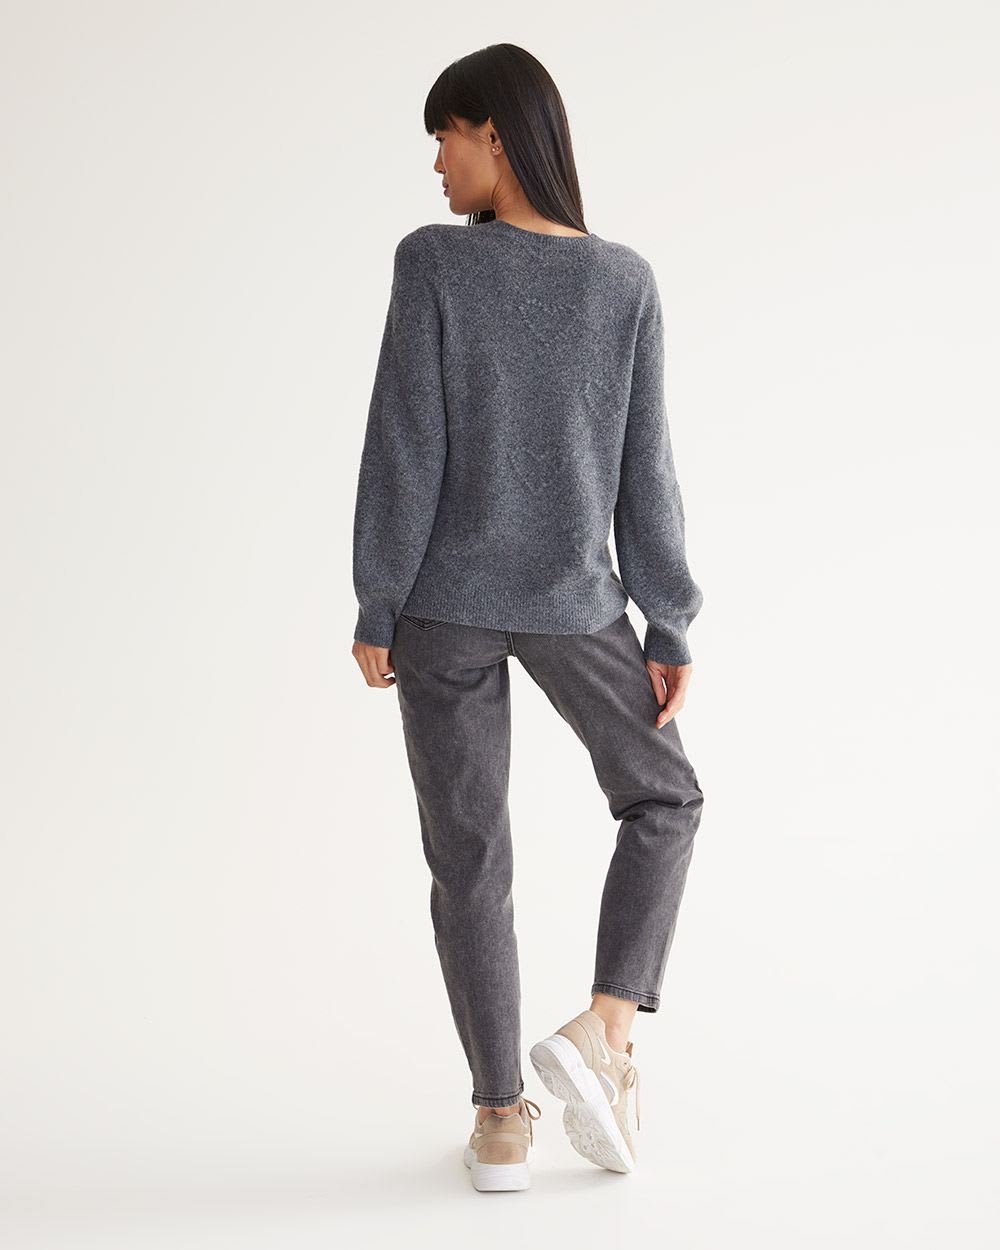 Long-Sleeve Crew Neck Pullover with Popcorn Stitch